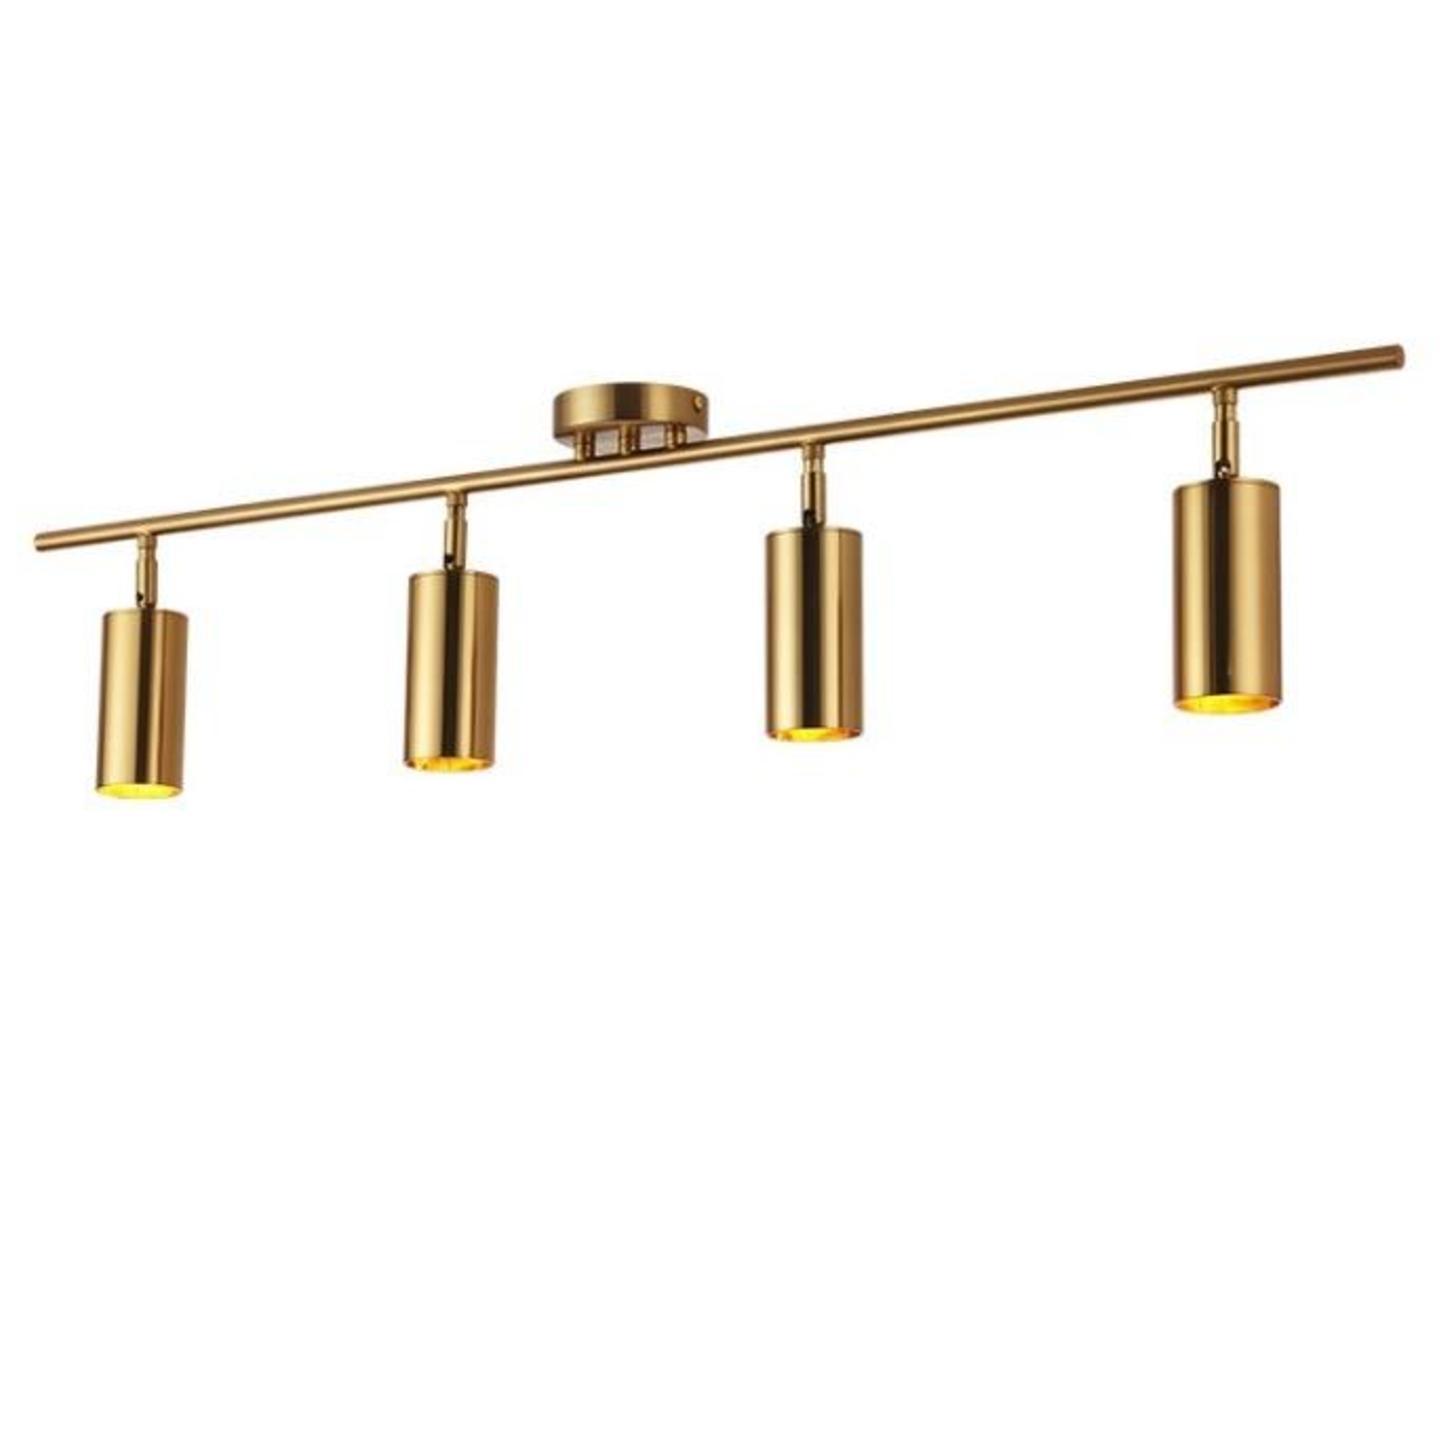 Gold Ceiling Mounted Spotlight